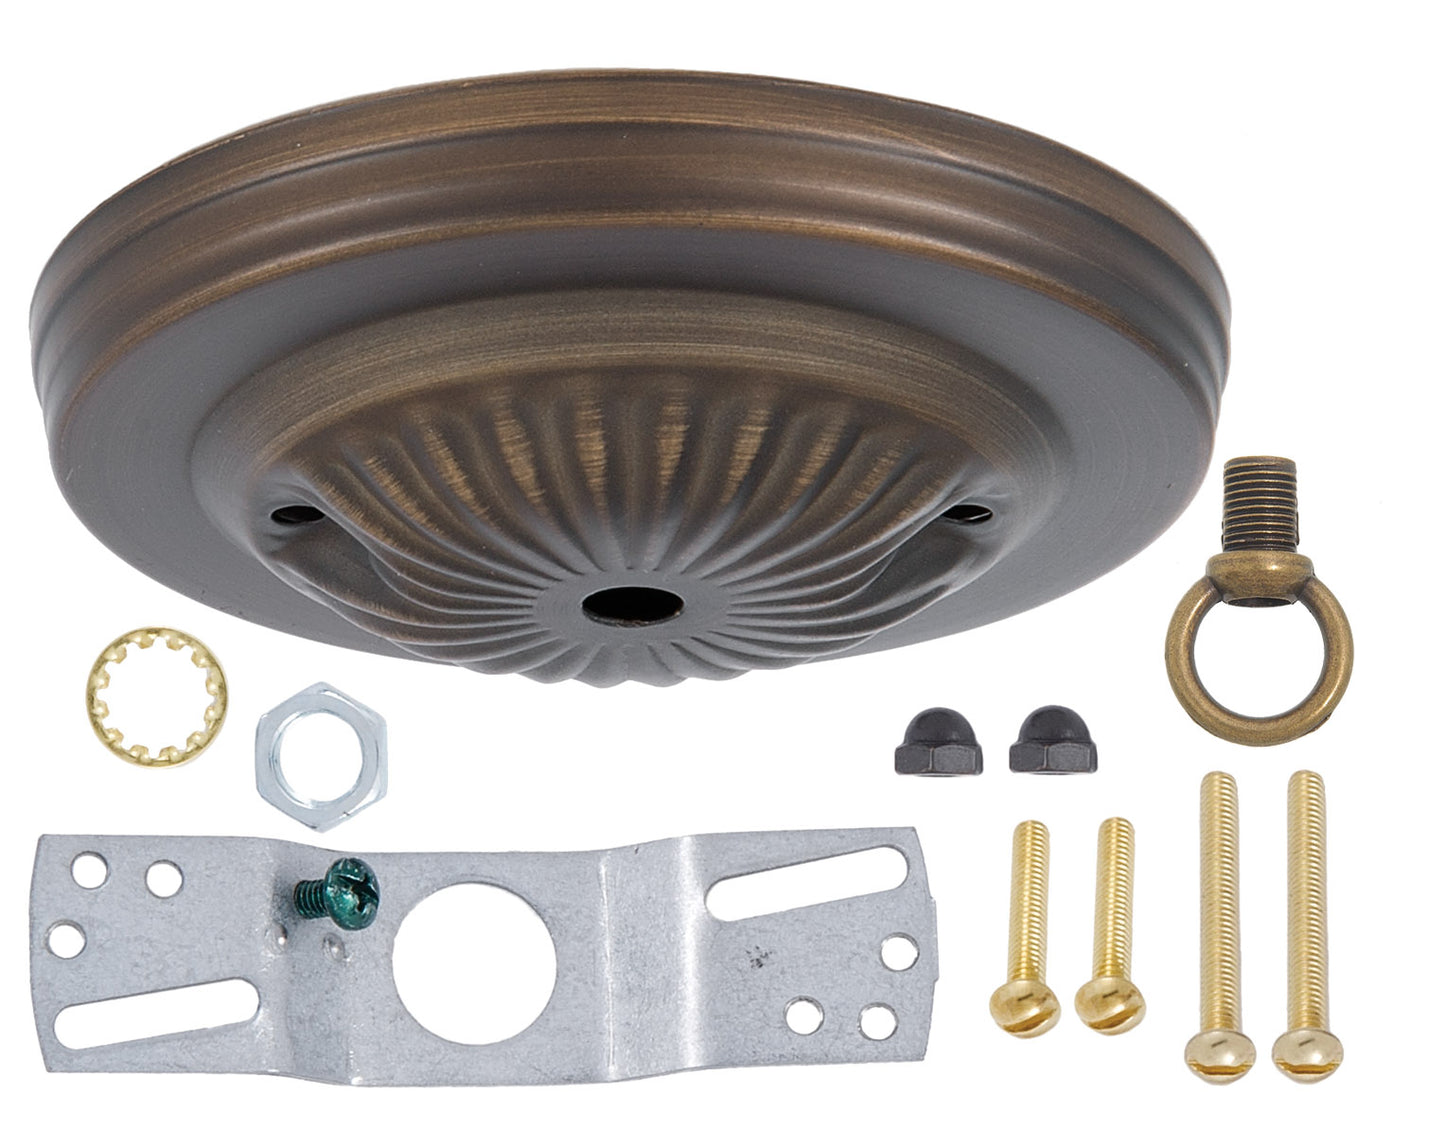 Antique Bronze Ceiling Canopy Kit with Hardware, 5-1/8" dia.